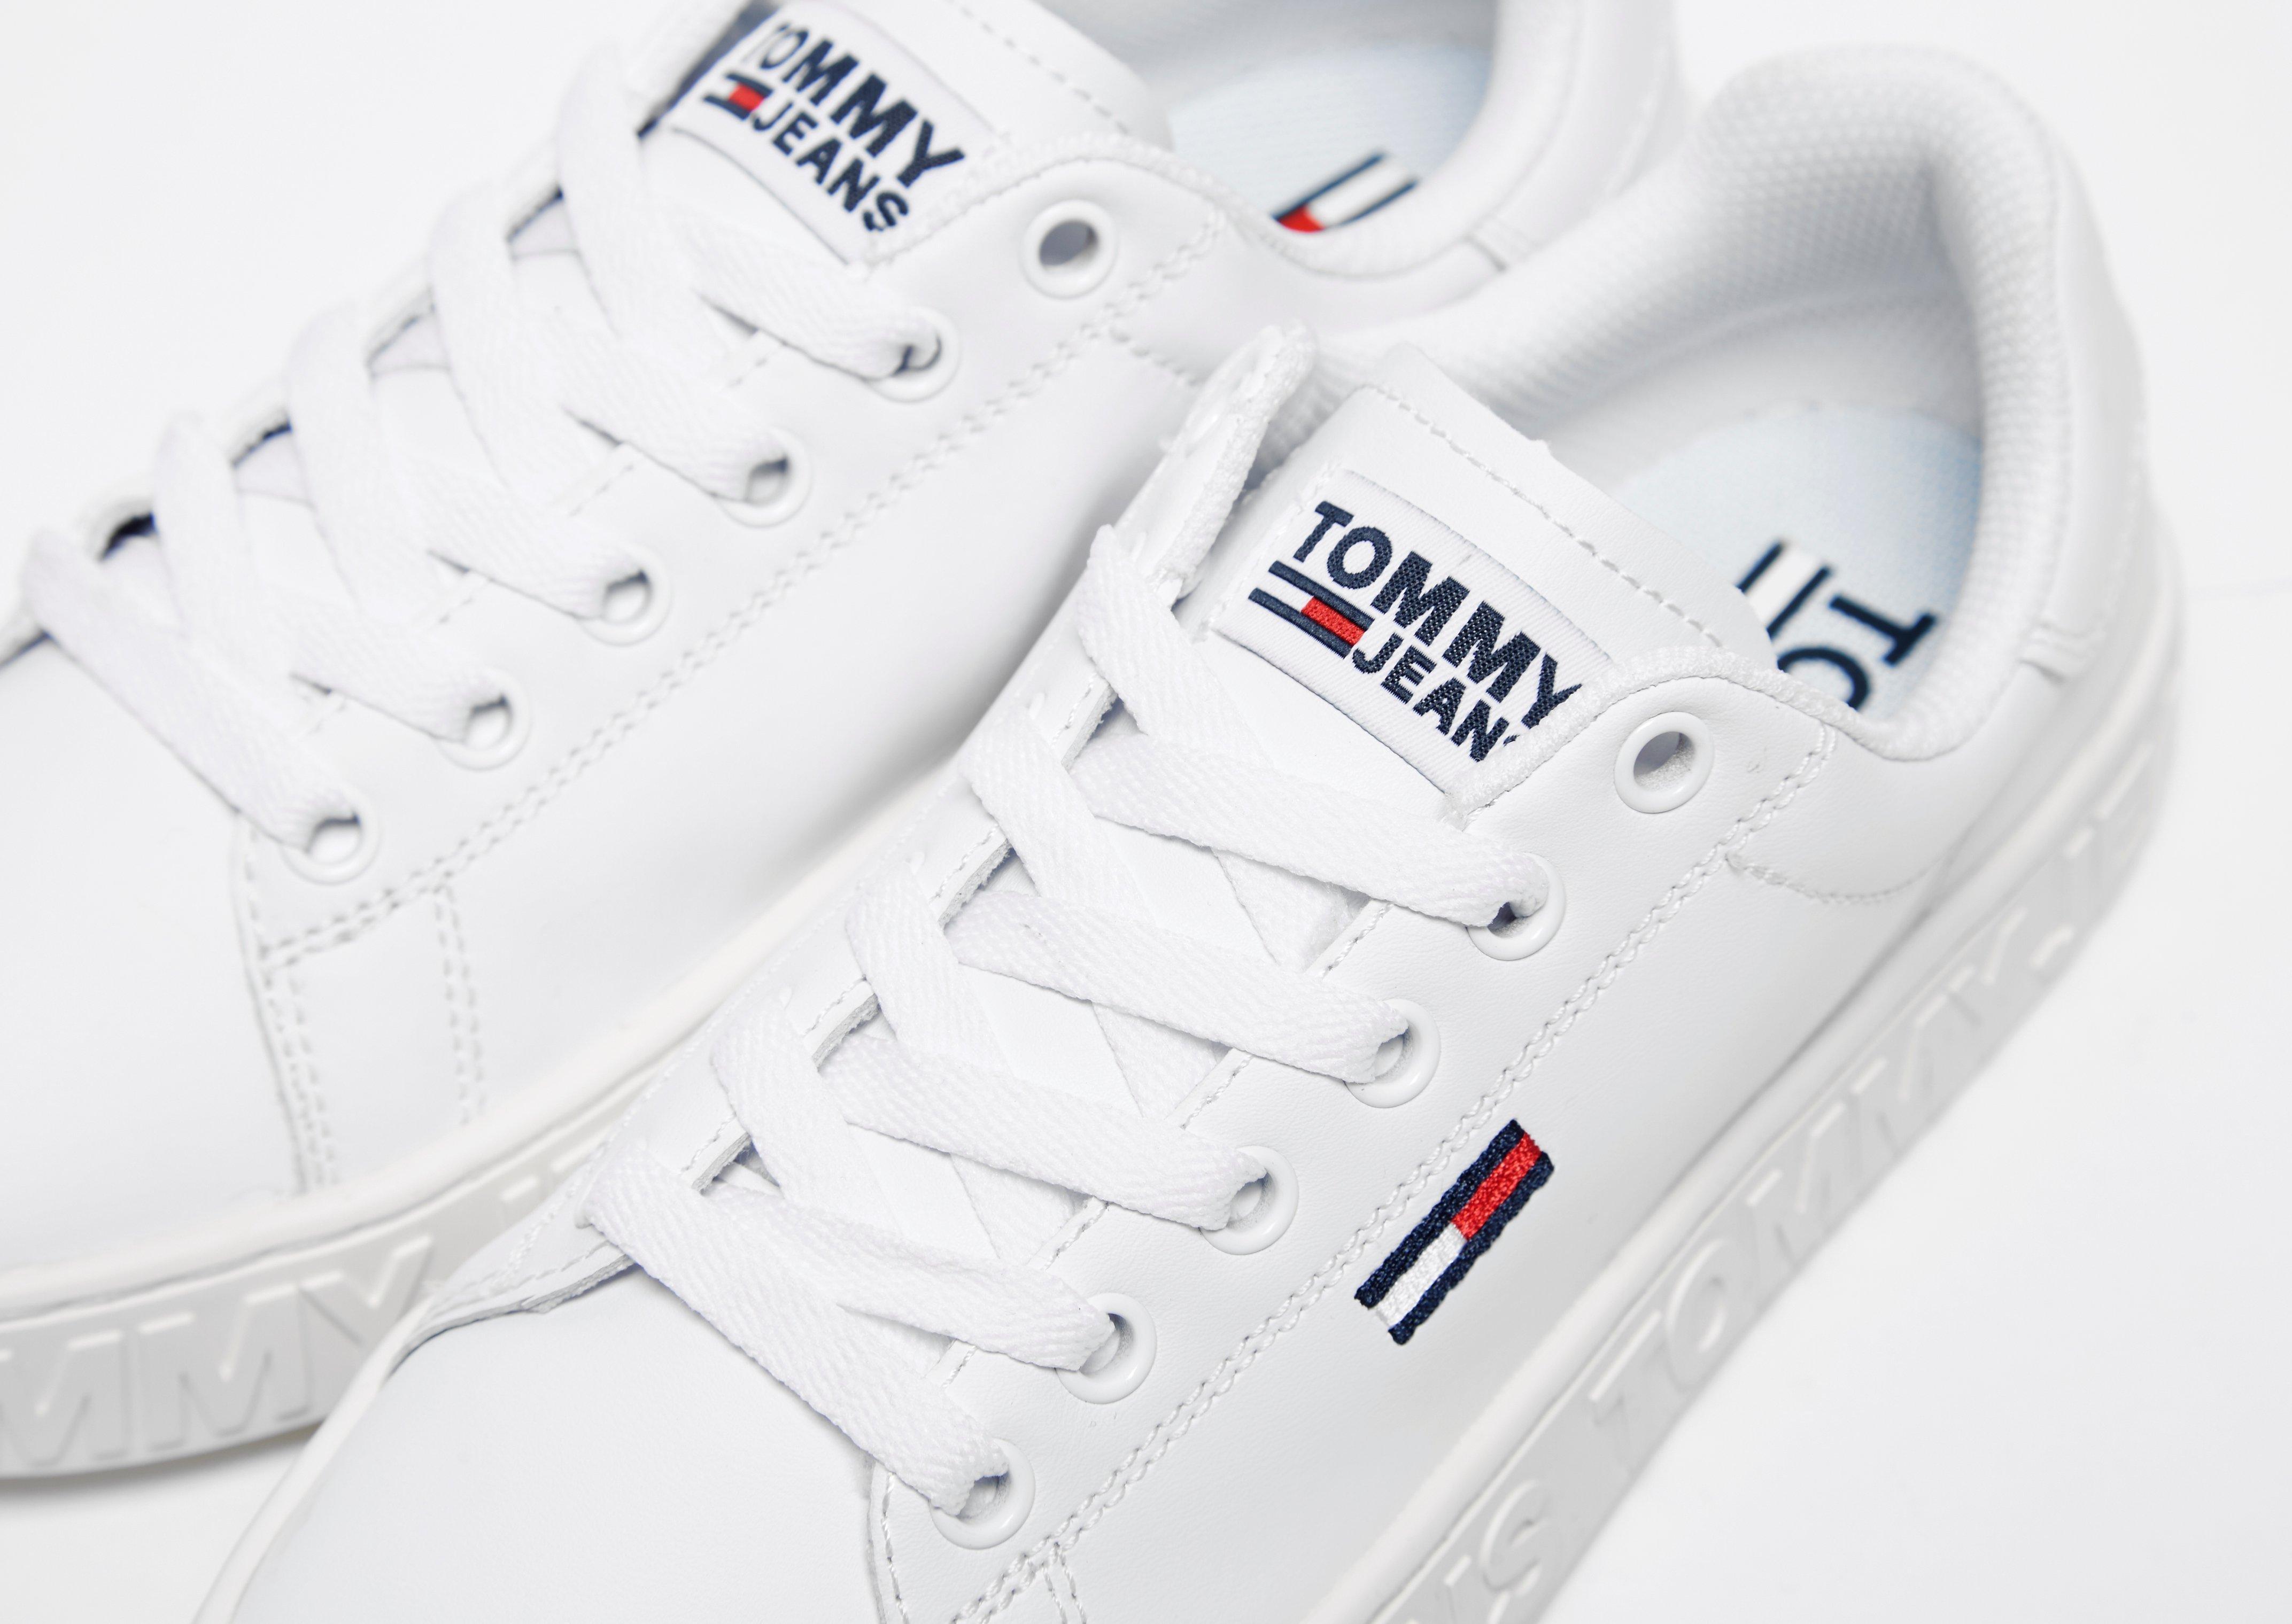 tommy hilfiger jeans sneakers